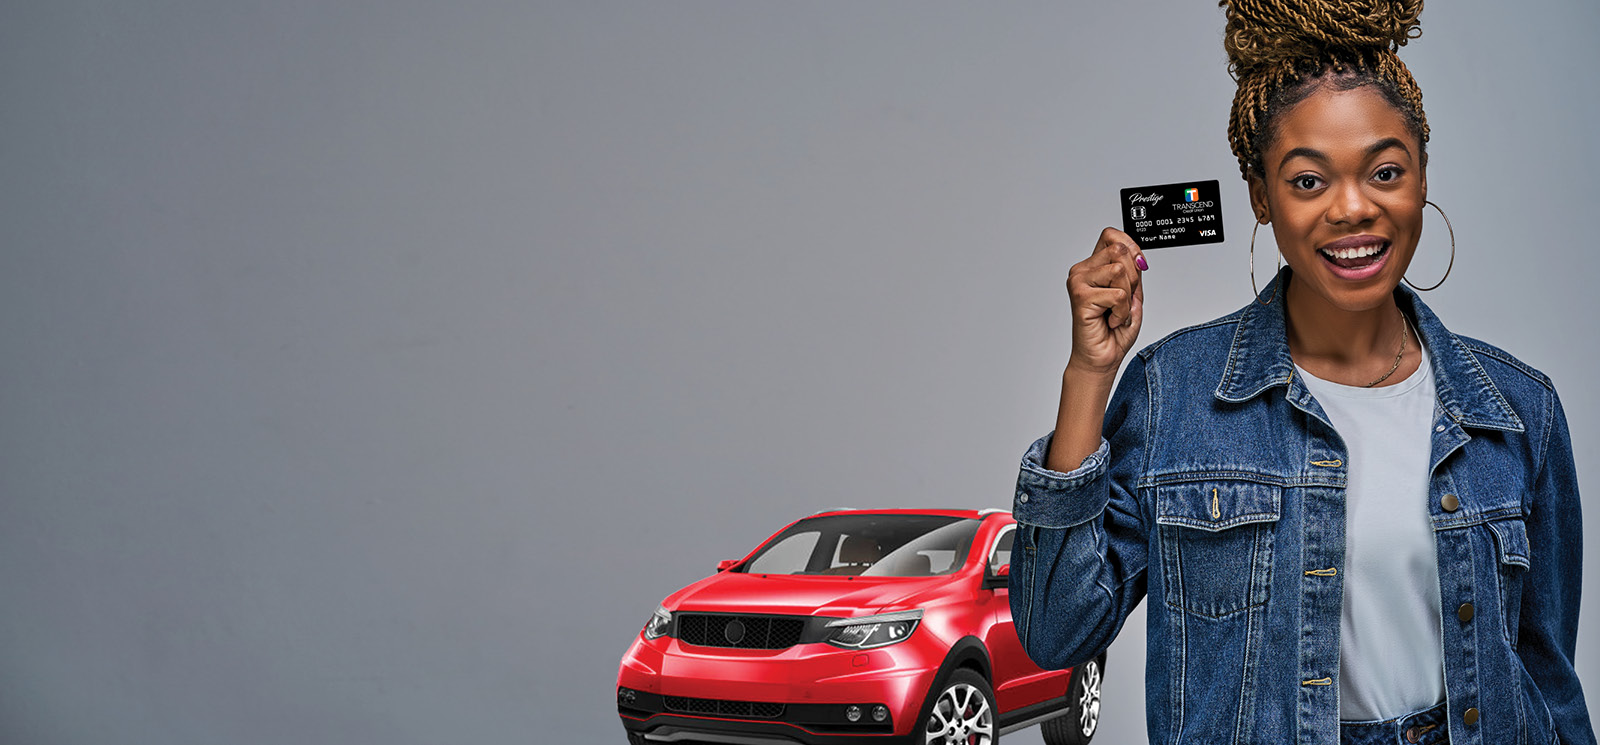 Woman with car holding her debit card